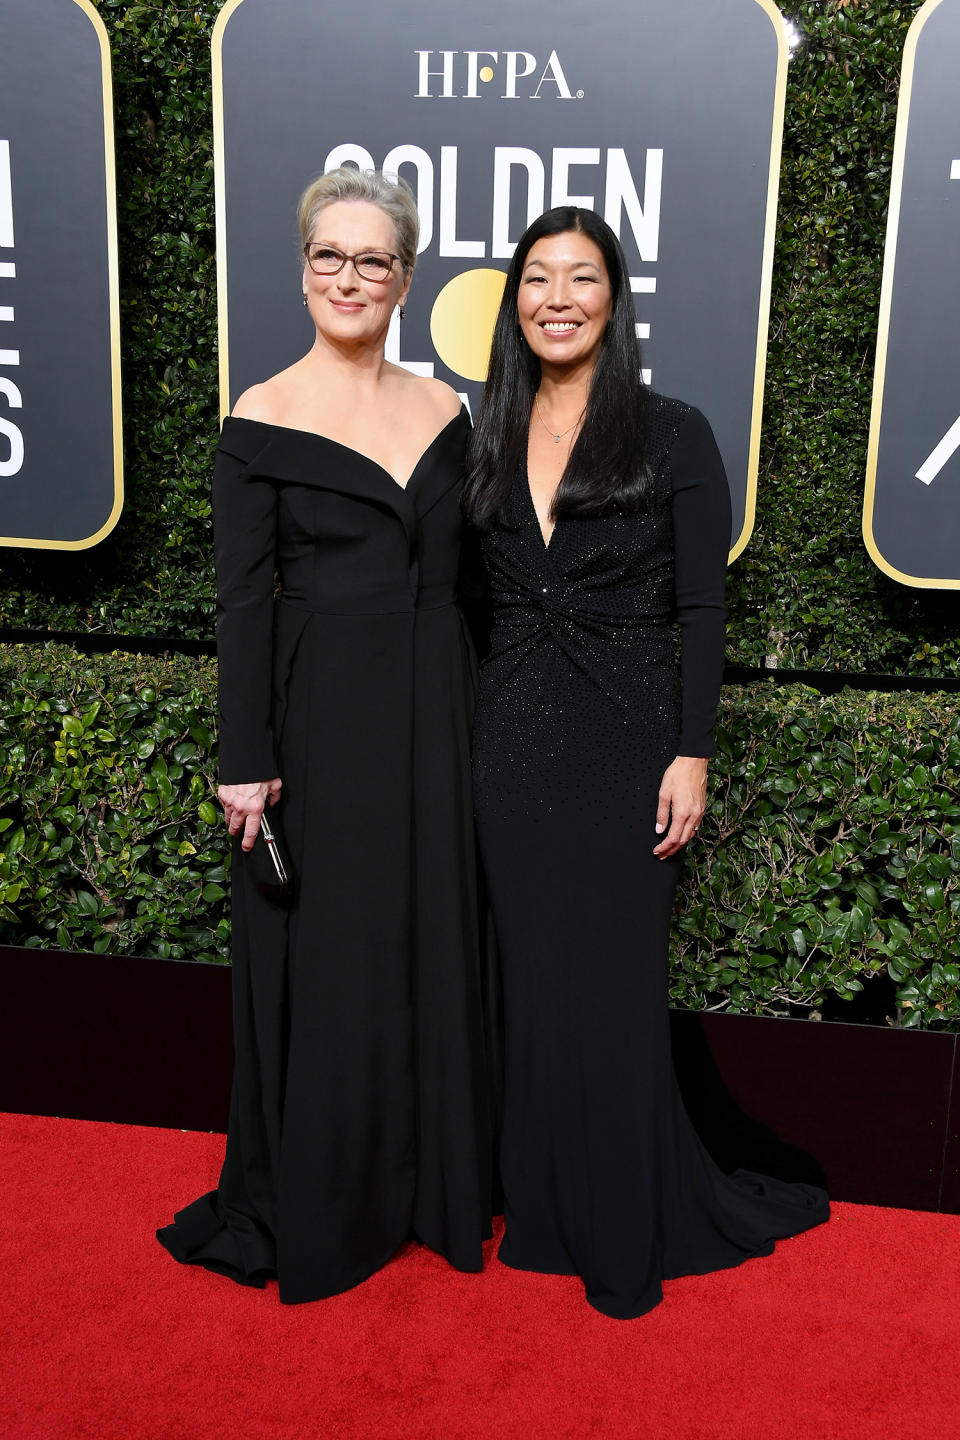 Actor Meryl Streep (L) and activist Ai-jen Poo attend The 75th Annual Golden Globe Awards at The Beverly Hilton Hotel on January 7, 2018 in Beverly Hills, California. (Photo by Steve Granitz/WireImage)